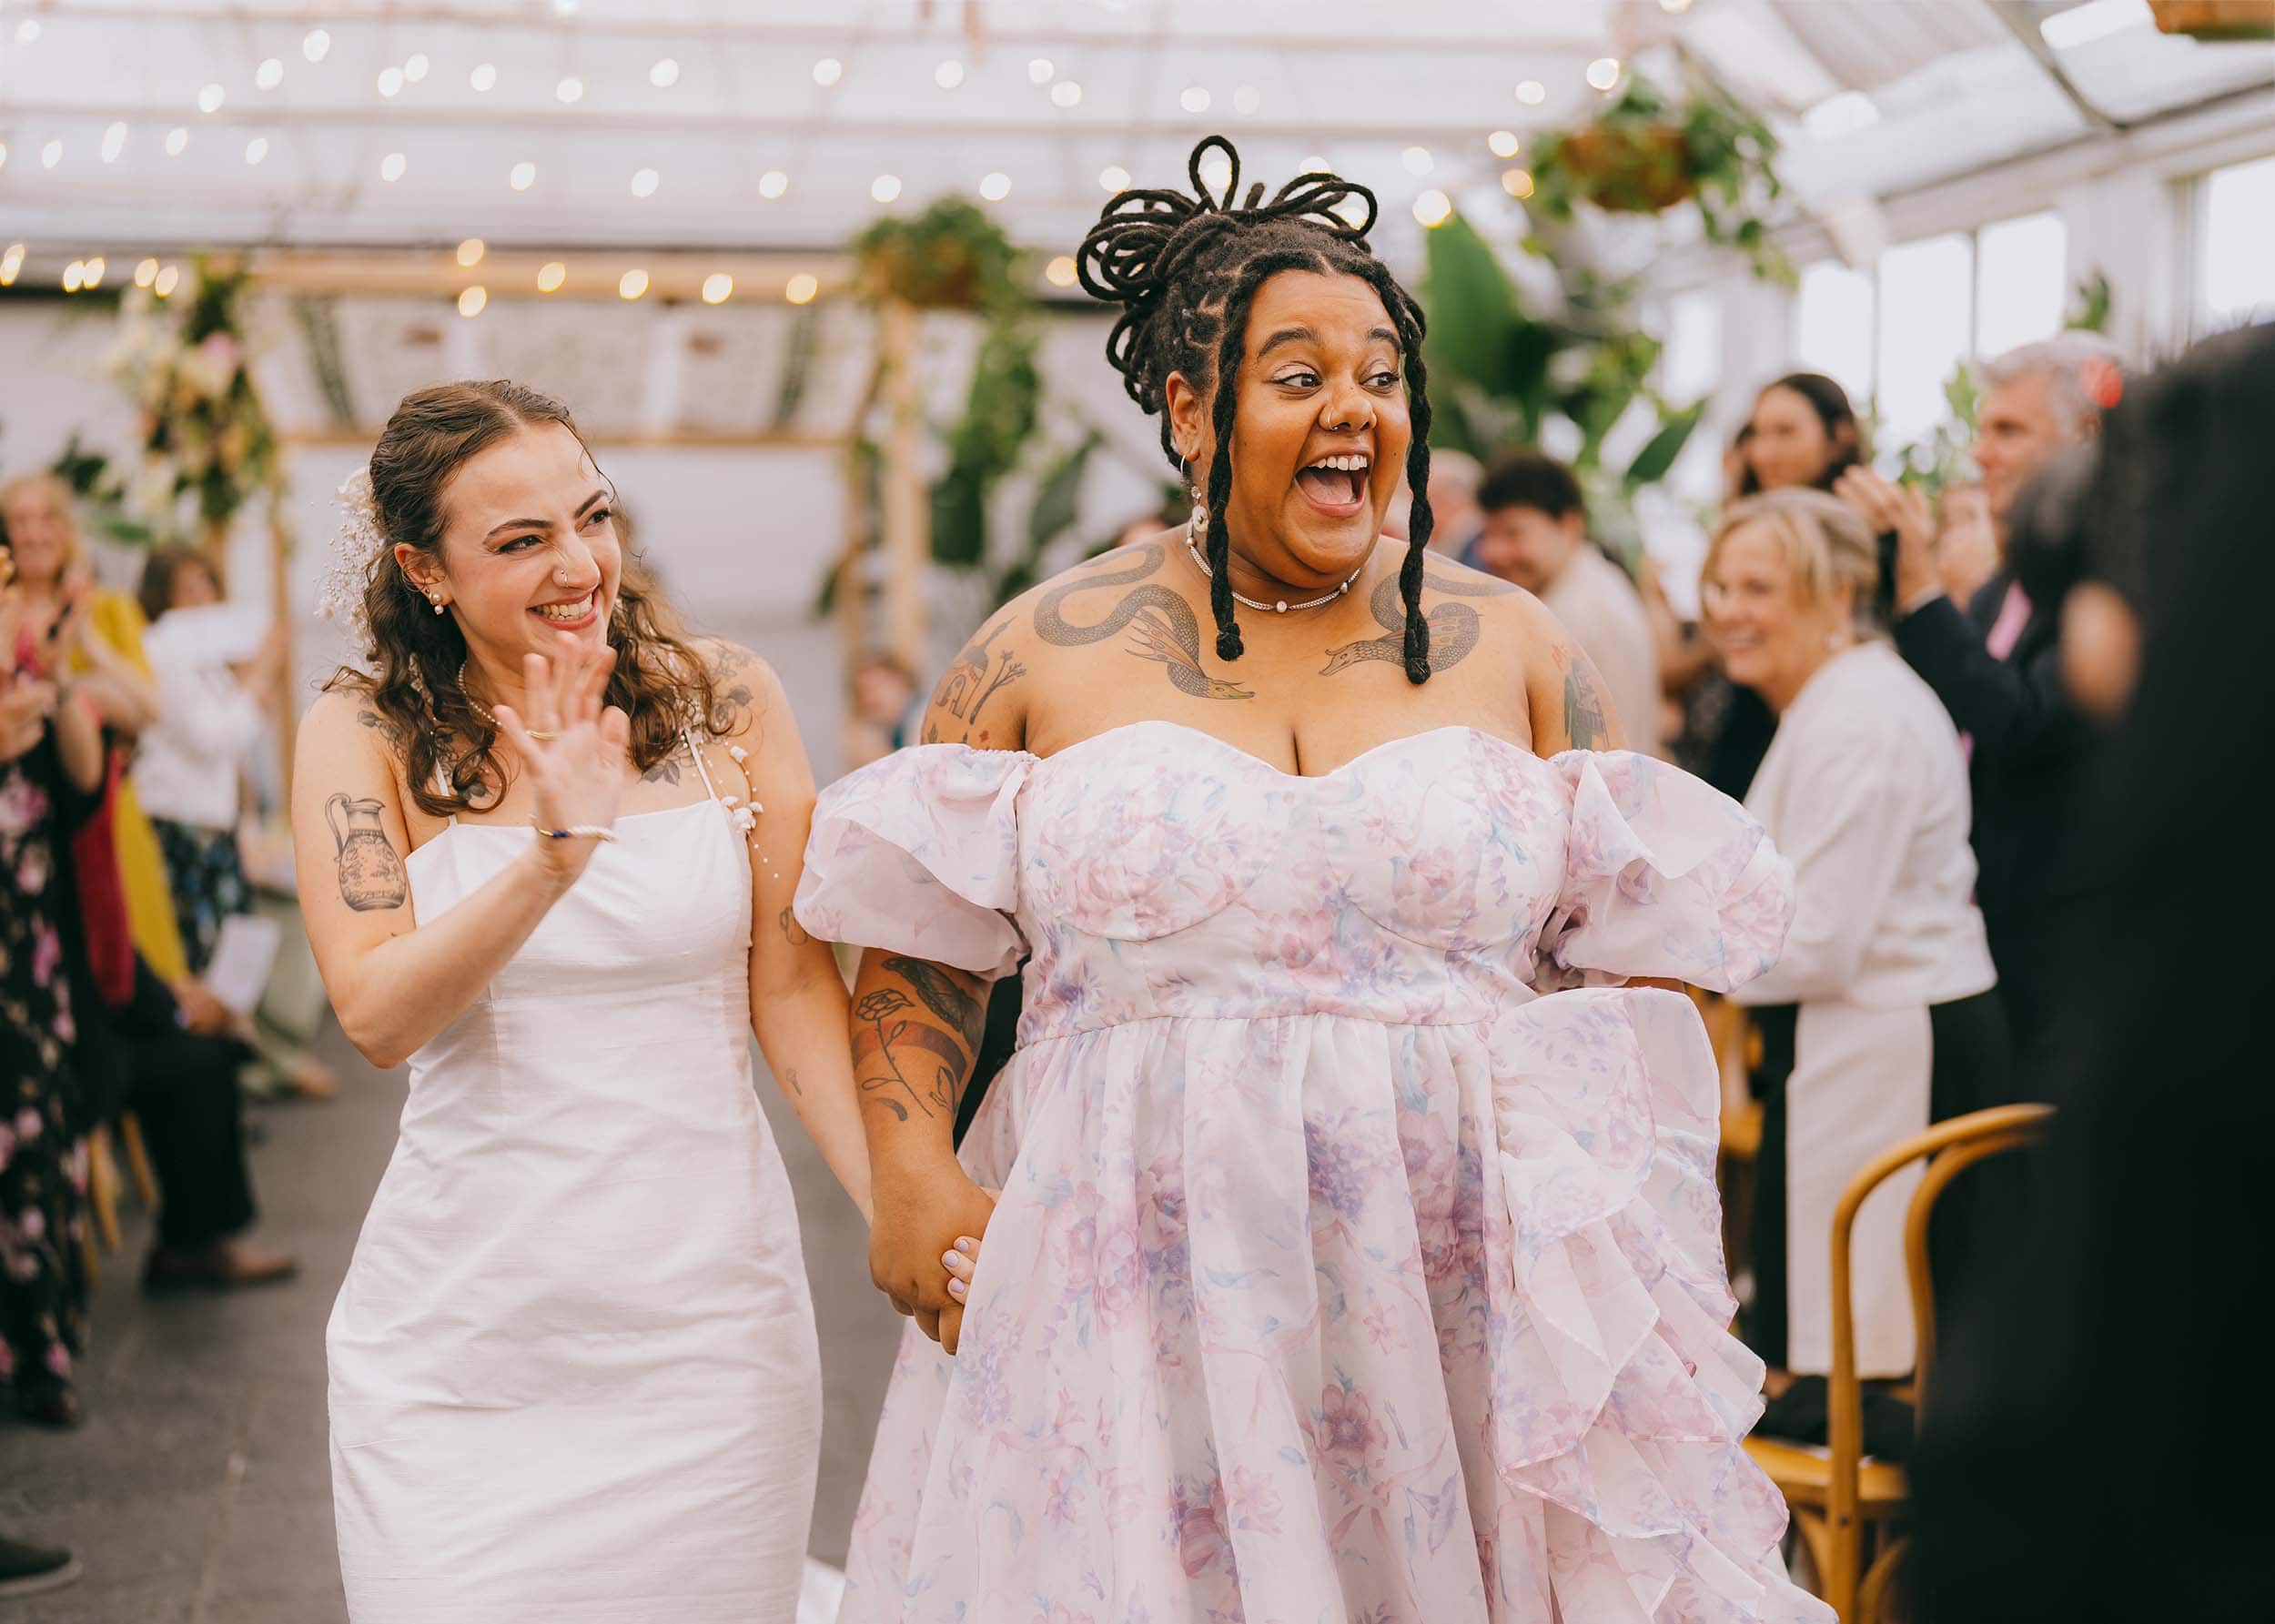 Eve and Cece beam with joy as they stroll down the aisle, greeted by standing guests who warmly congratulate them on their newly sealed union.